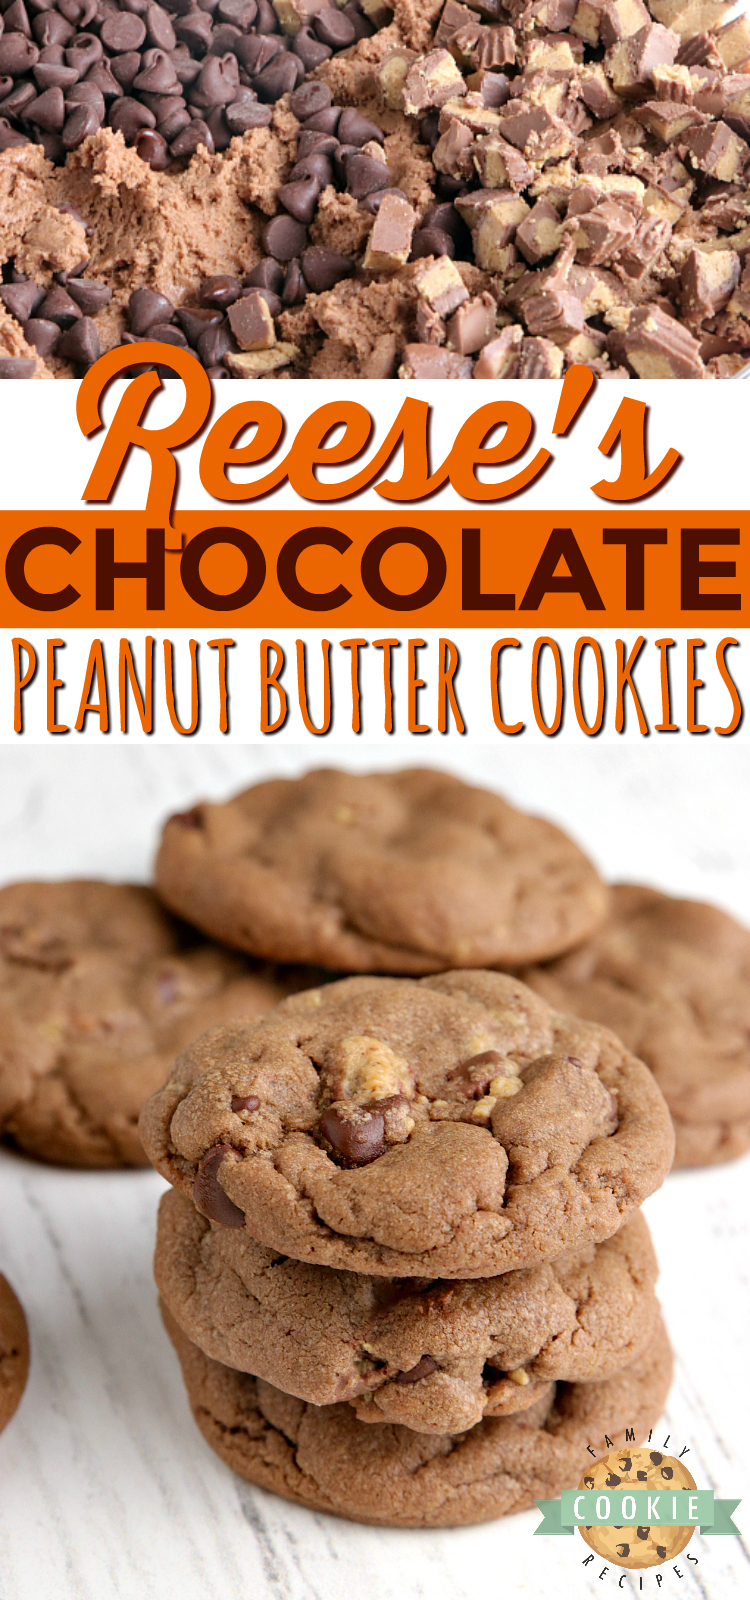 Reese's Chocolate Peanut Butter Cookies are full of chocolate, peanut butter and Reese's Peanut Butter Cups. Peanut butter cookie recipe that is soft, chewy and absolutely perfect! via @buttergirls